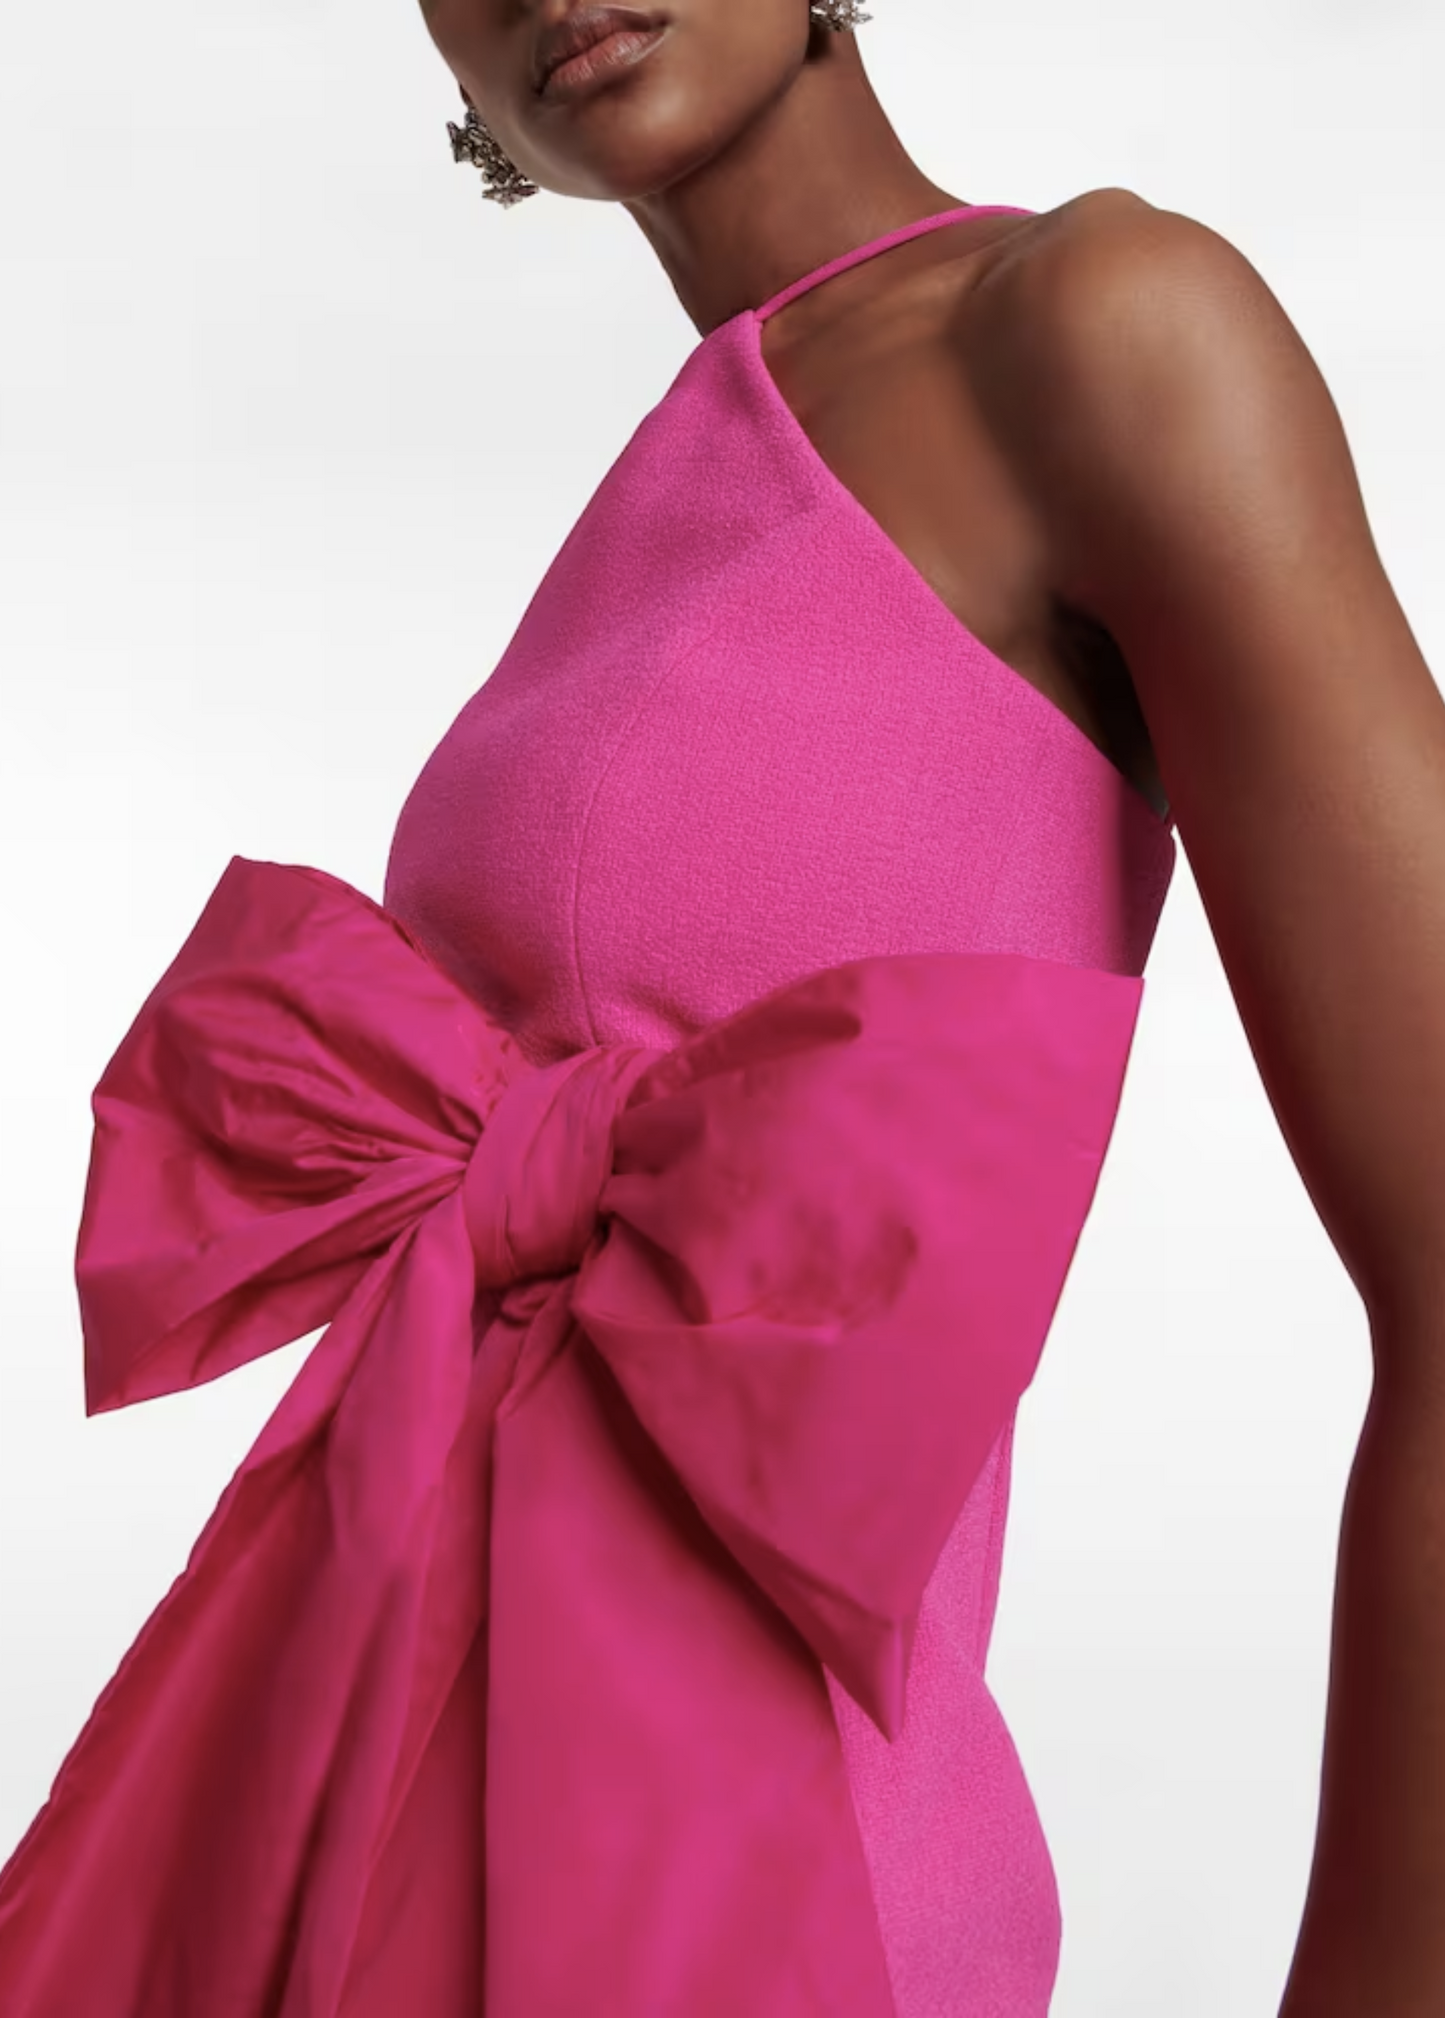 CUPID'S BOW HOT PINK DRESS